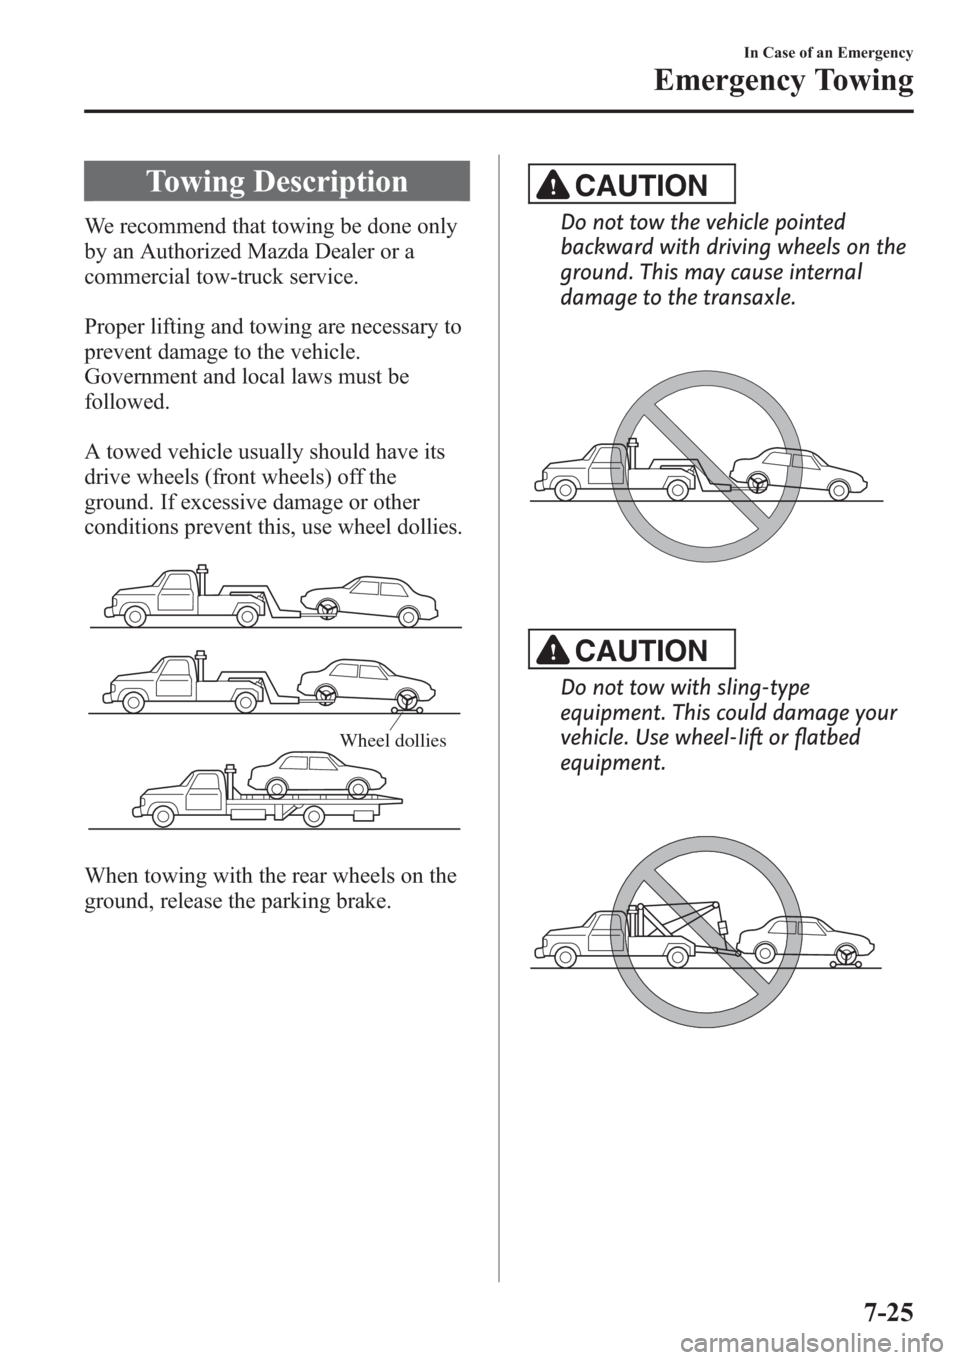 MAZDA MODEL 3 HATCHBACK 2013  Owners Manual (in English) Towing Description
We recommend that towing be done only
by an Authorized Mazda Dealer or a
commercial tow-truck service.
Proper lifting and towing are necessary to
prevent damage to the vehicle.
Gove